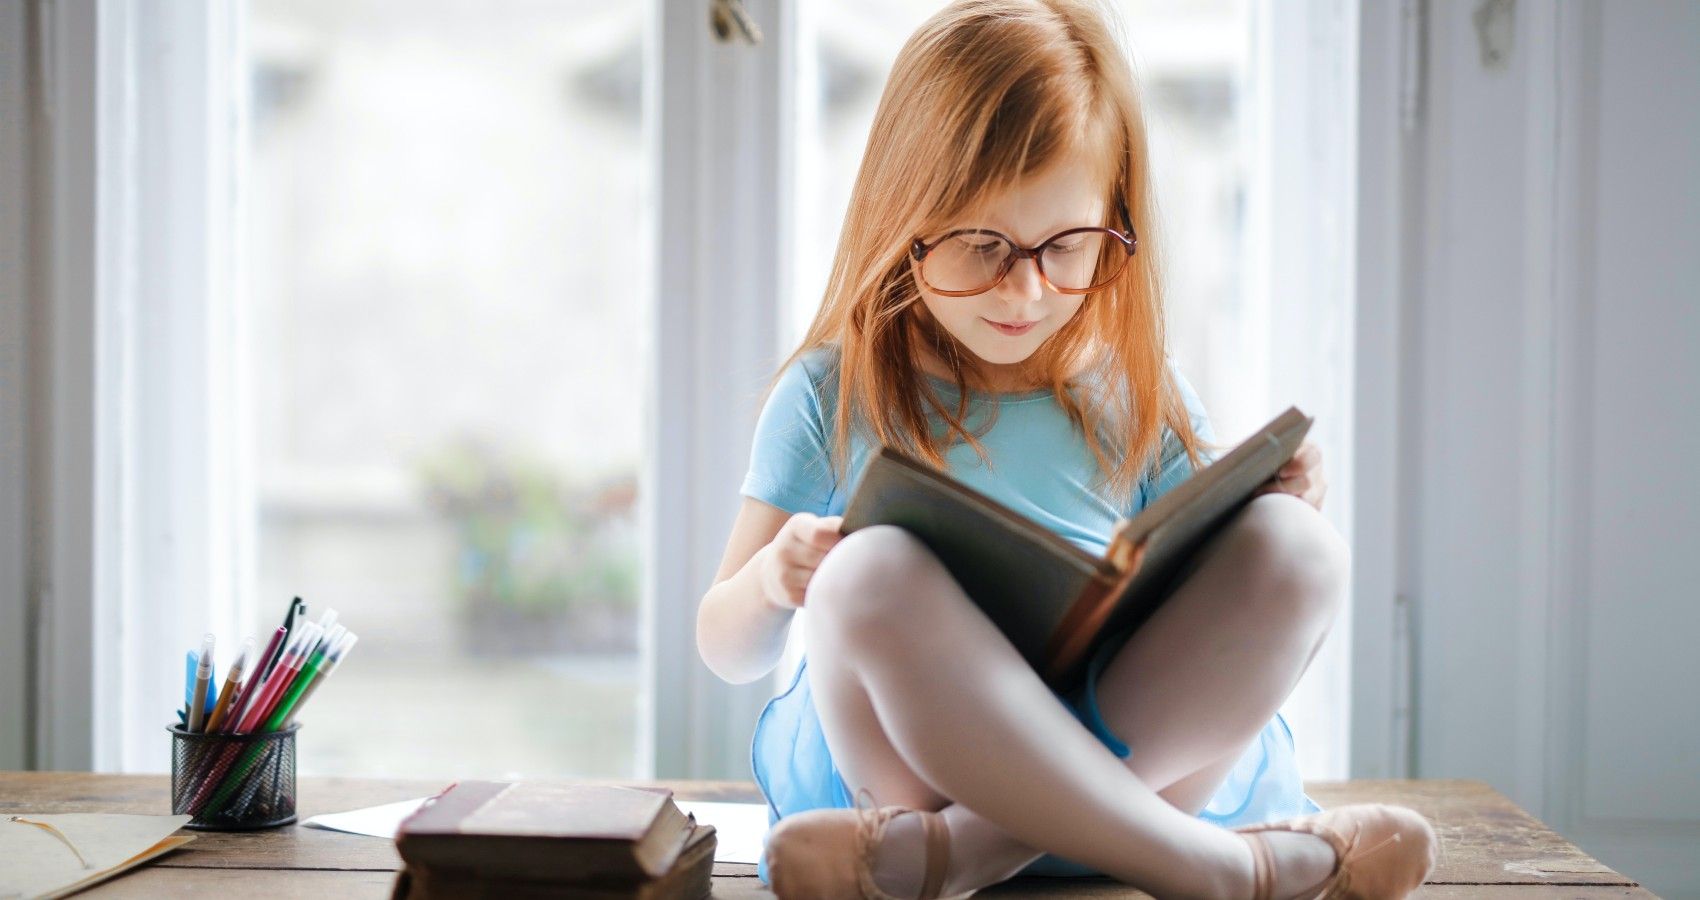 A Young Girl Sitting And Reading A Book With Extra Spaces